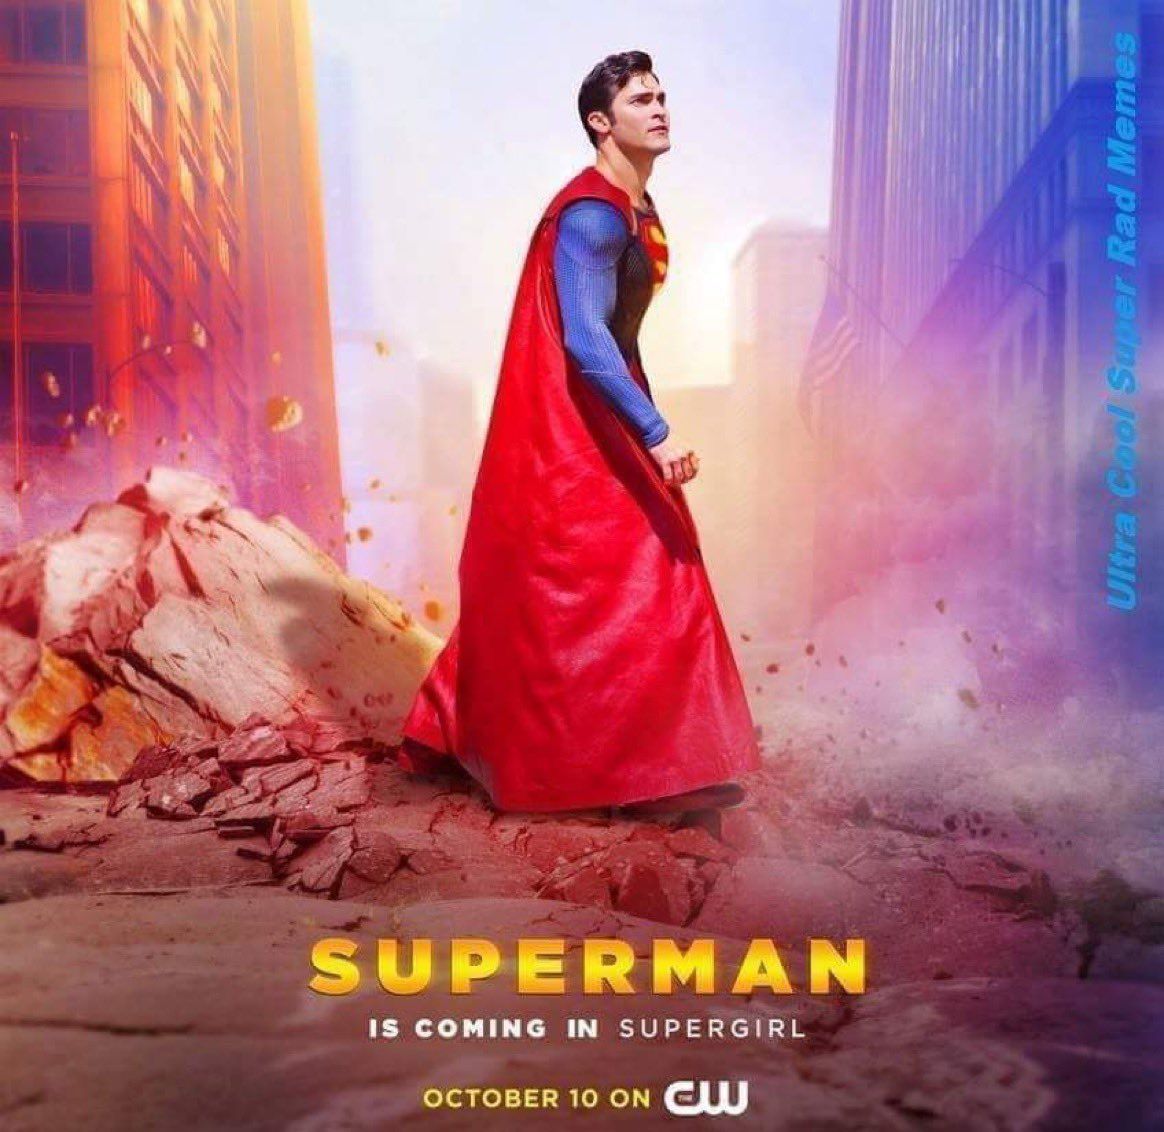 superman is doing what?